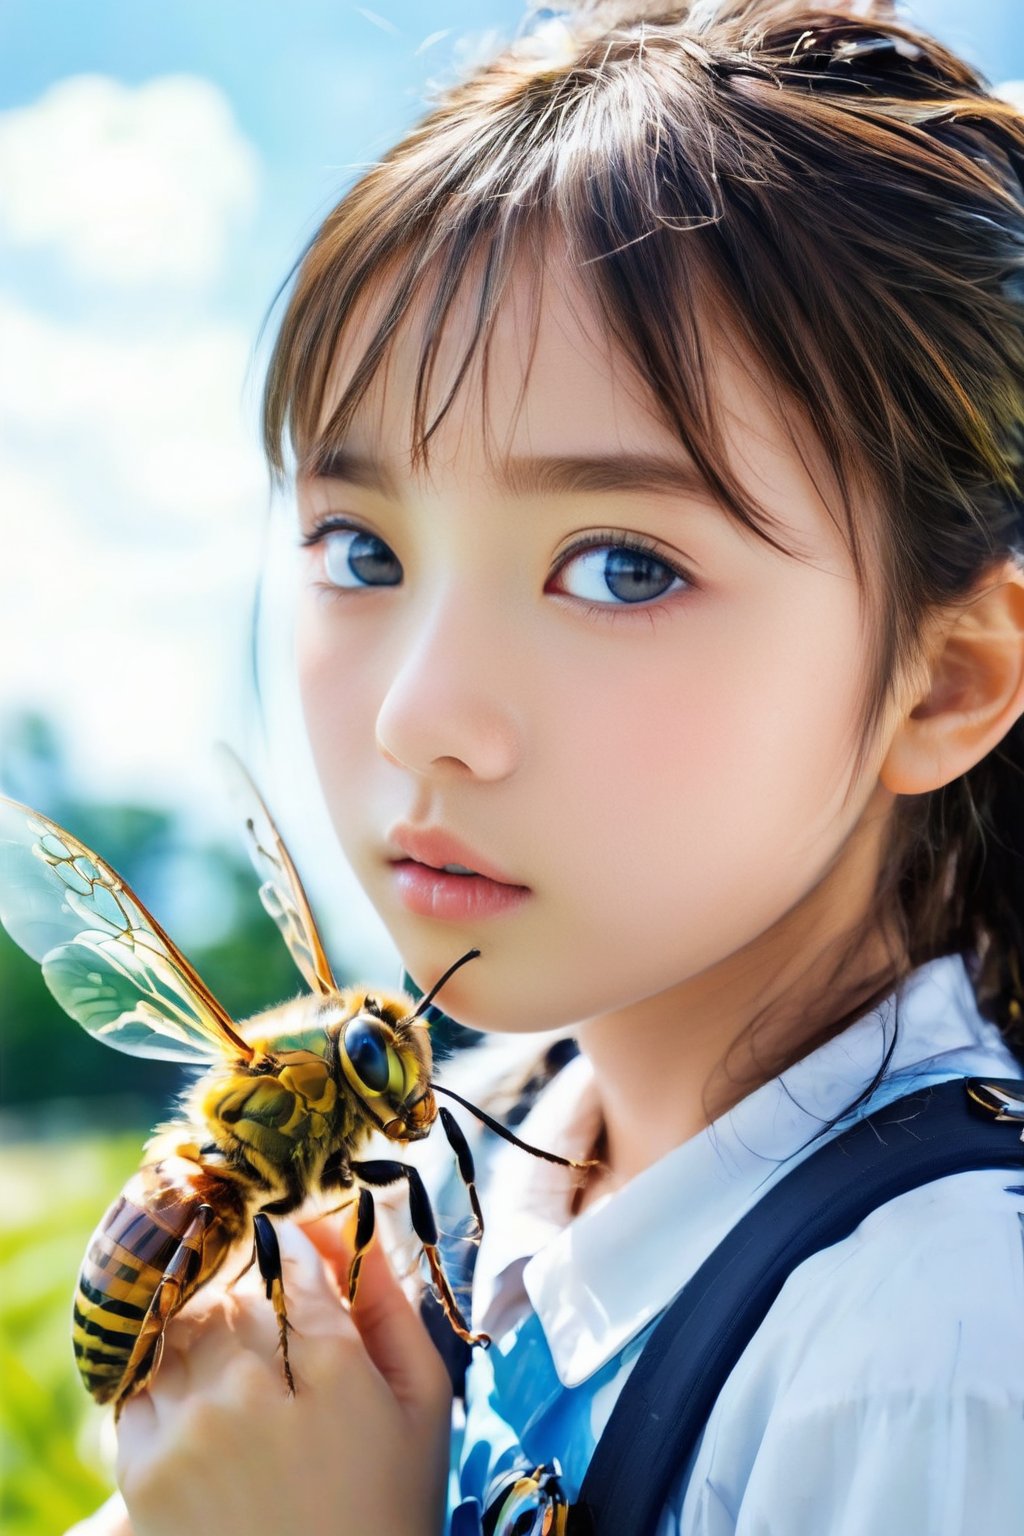 A close-up shot of a young girl perched on the back of a massive, iridescent hornet as it flies through a clear blue sky. The sun casts a warm glow, illuminating the delicate patterns on the insect's body. The girl holds onto the hornet's thorax with one hand and grips her backpack with the other. Her school uniform is slightly ruffled from the wind, and a determined look is etched on her face. The composition is centered around the girl and the hornet, with the surrounding landscape blurred to emphasize their unique relationship.